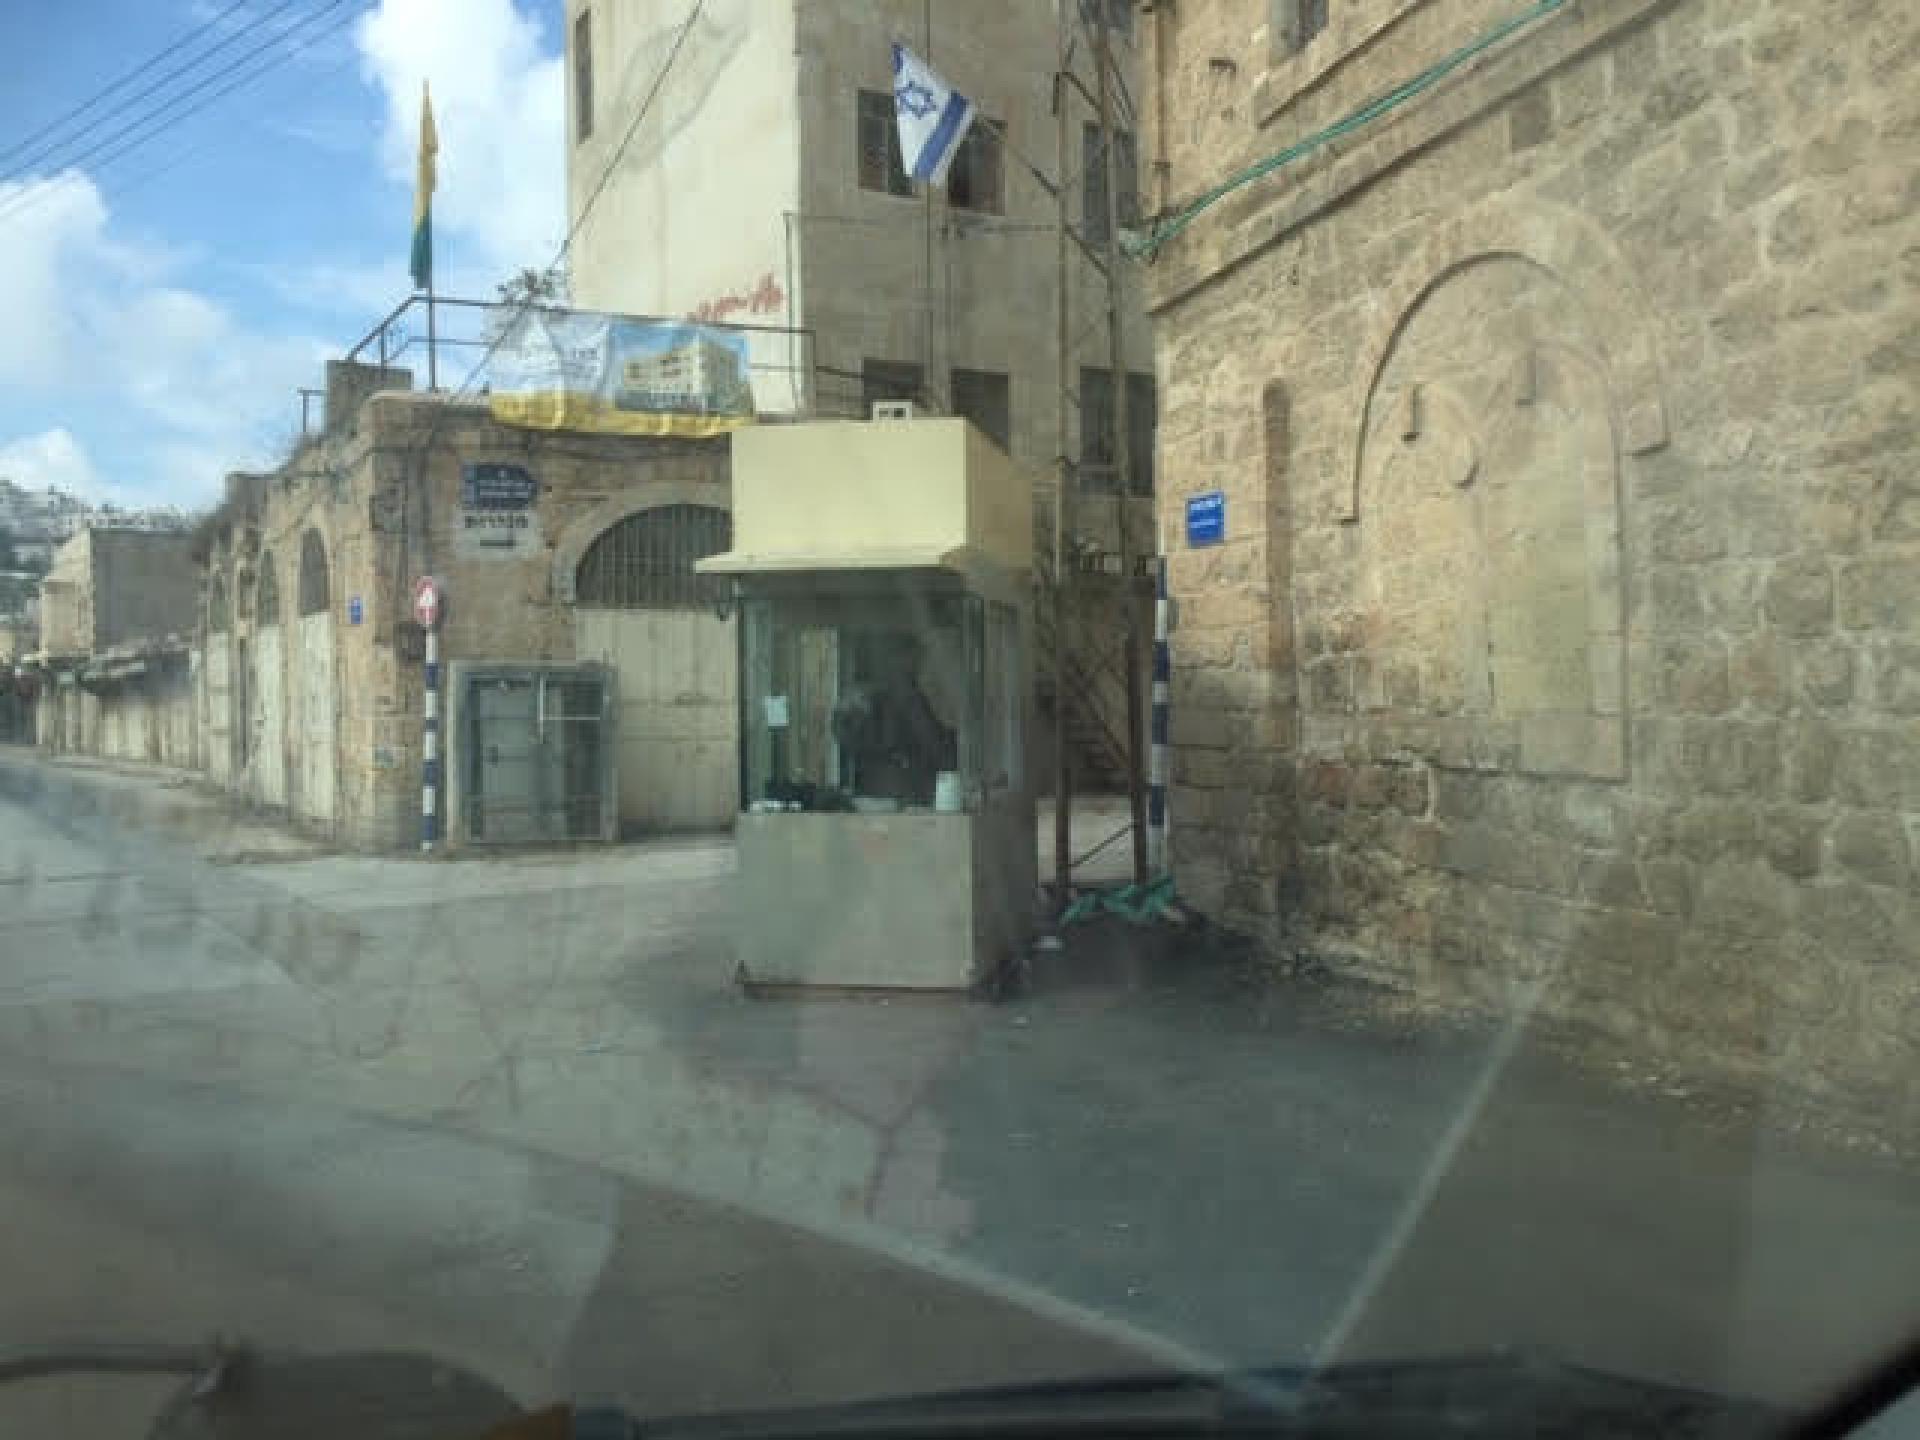 The checkpoint at the entrance to Abraham Our Father neighborhood